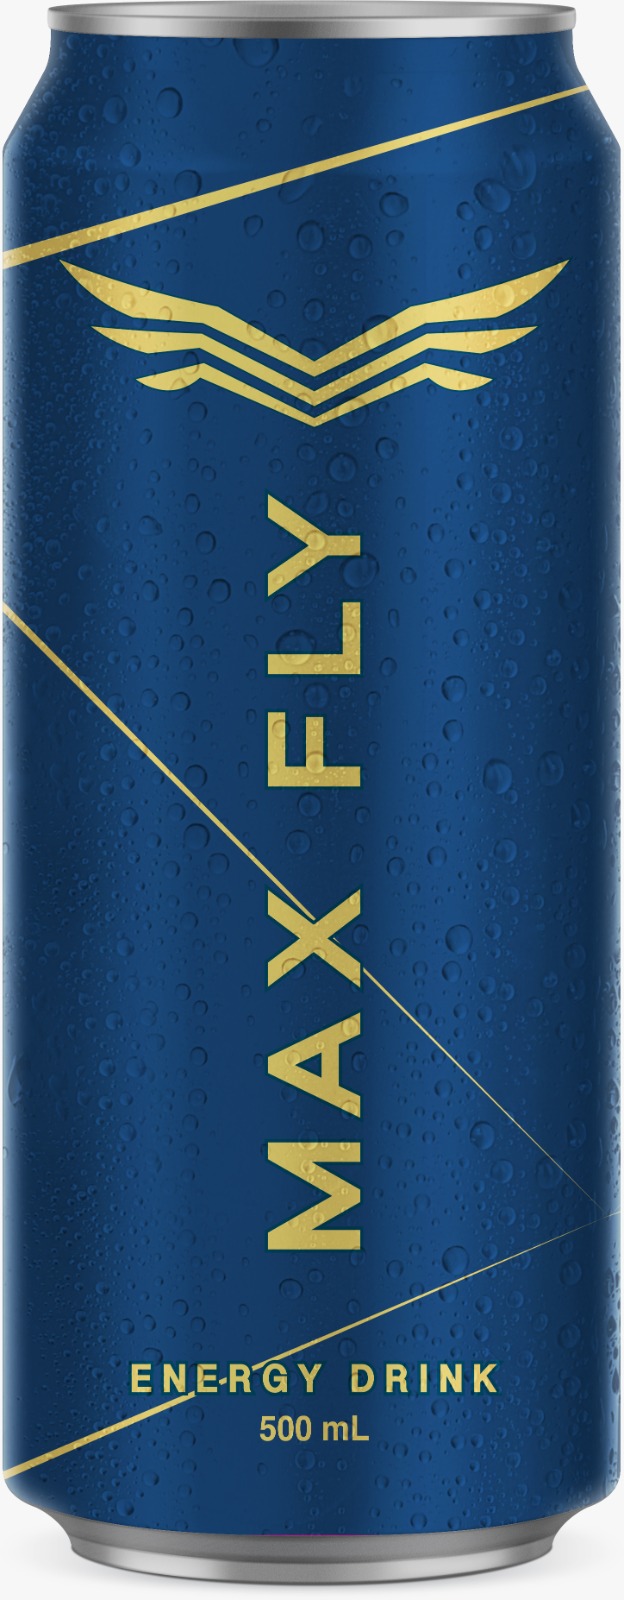 Max Fly Max Fly Energy Drink 500 ml X24 1